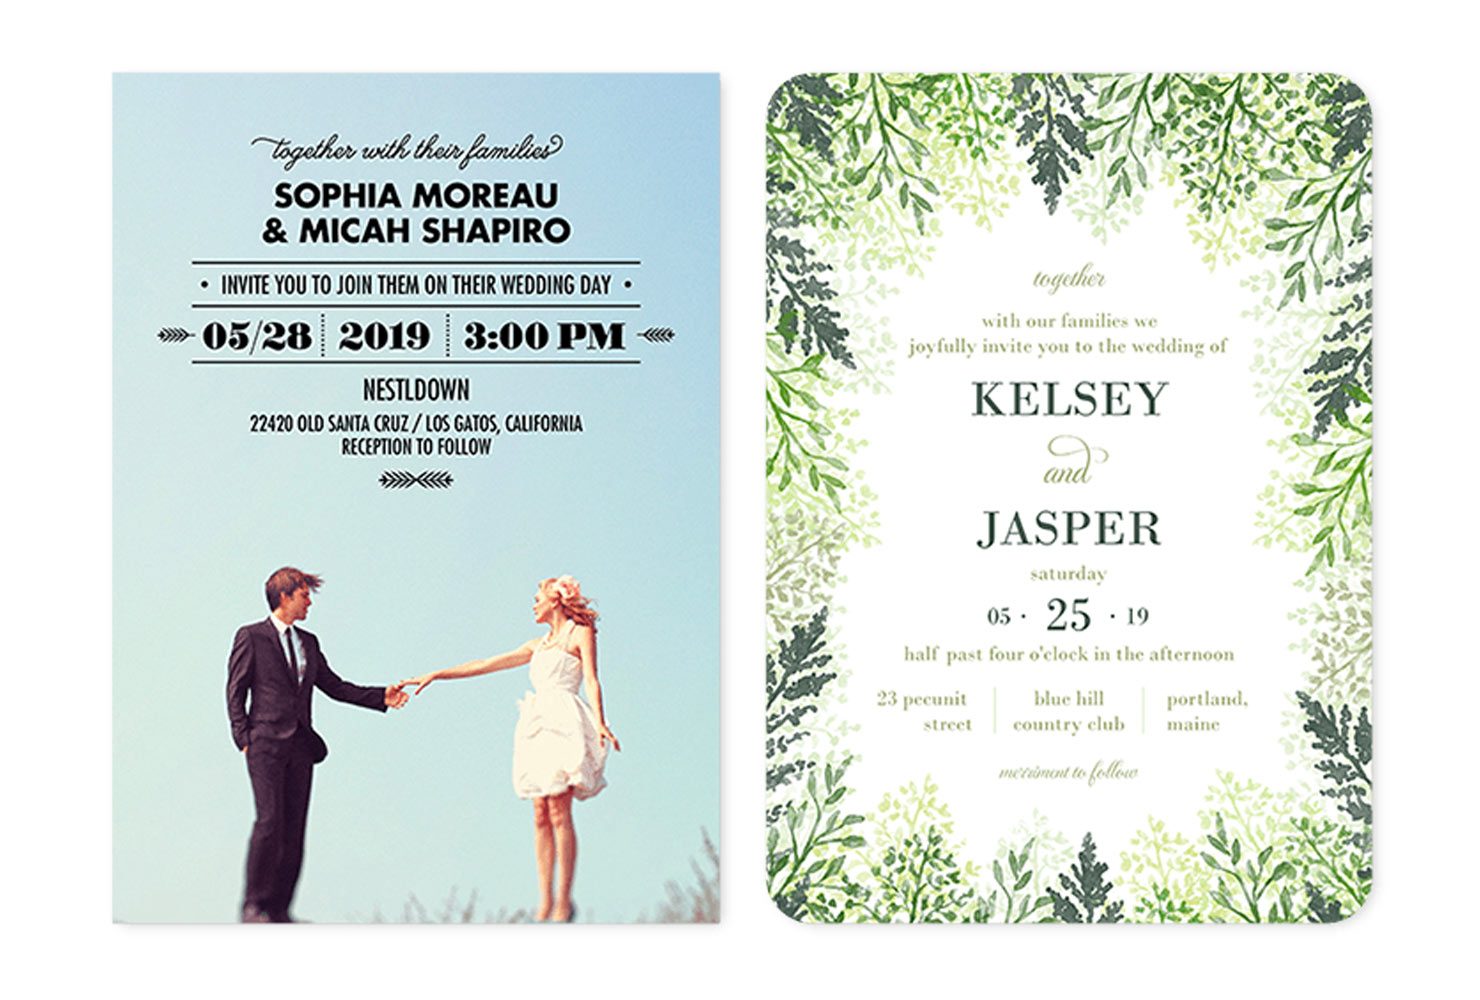 Wedding Invitation Wording 35 Wedding Invitation Wording Examples 2018 Shutterfly